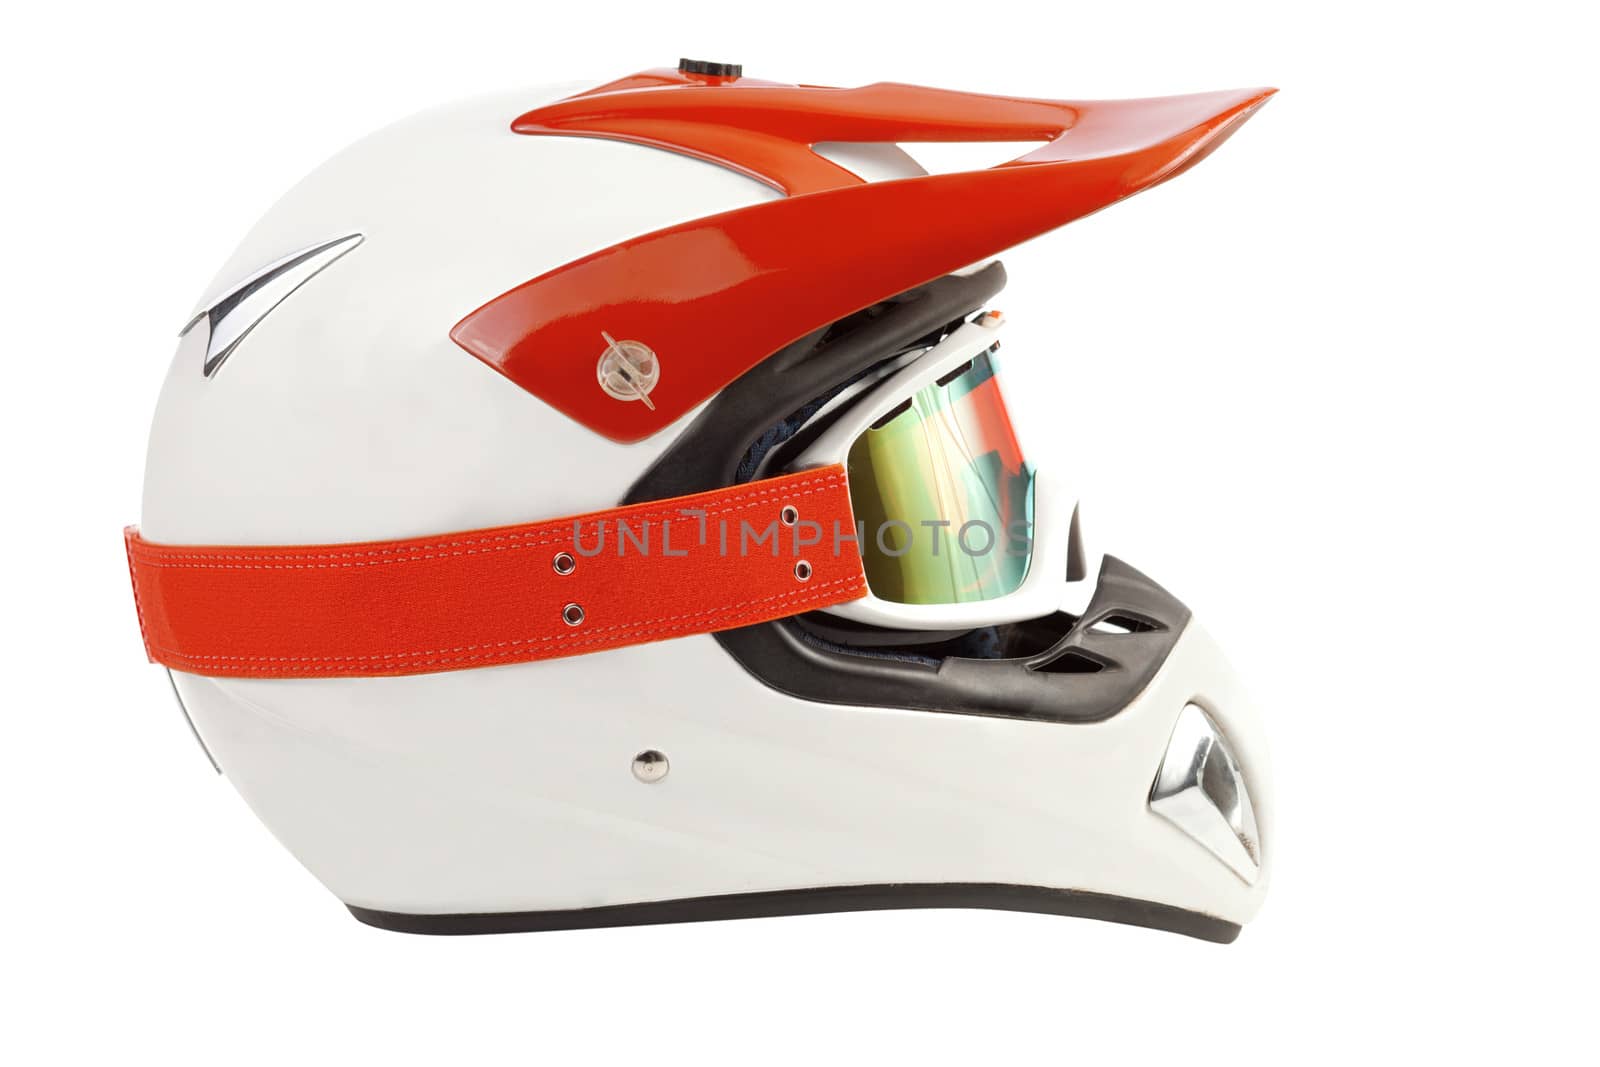 Enduro motorcycle helmet with goggles by Kor